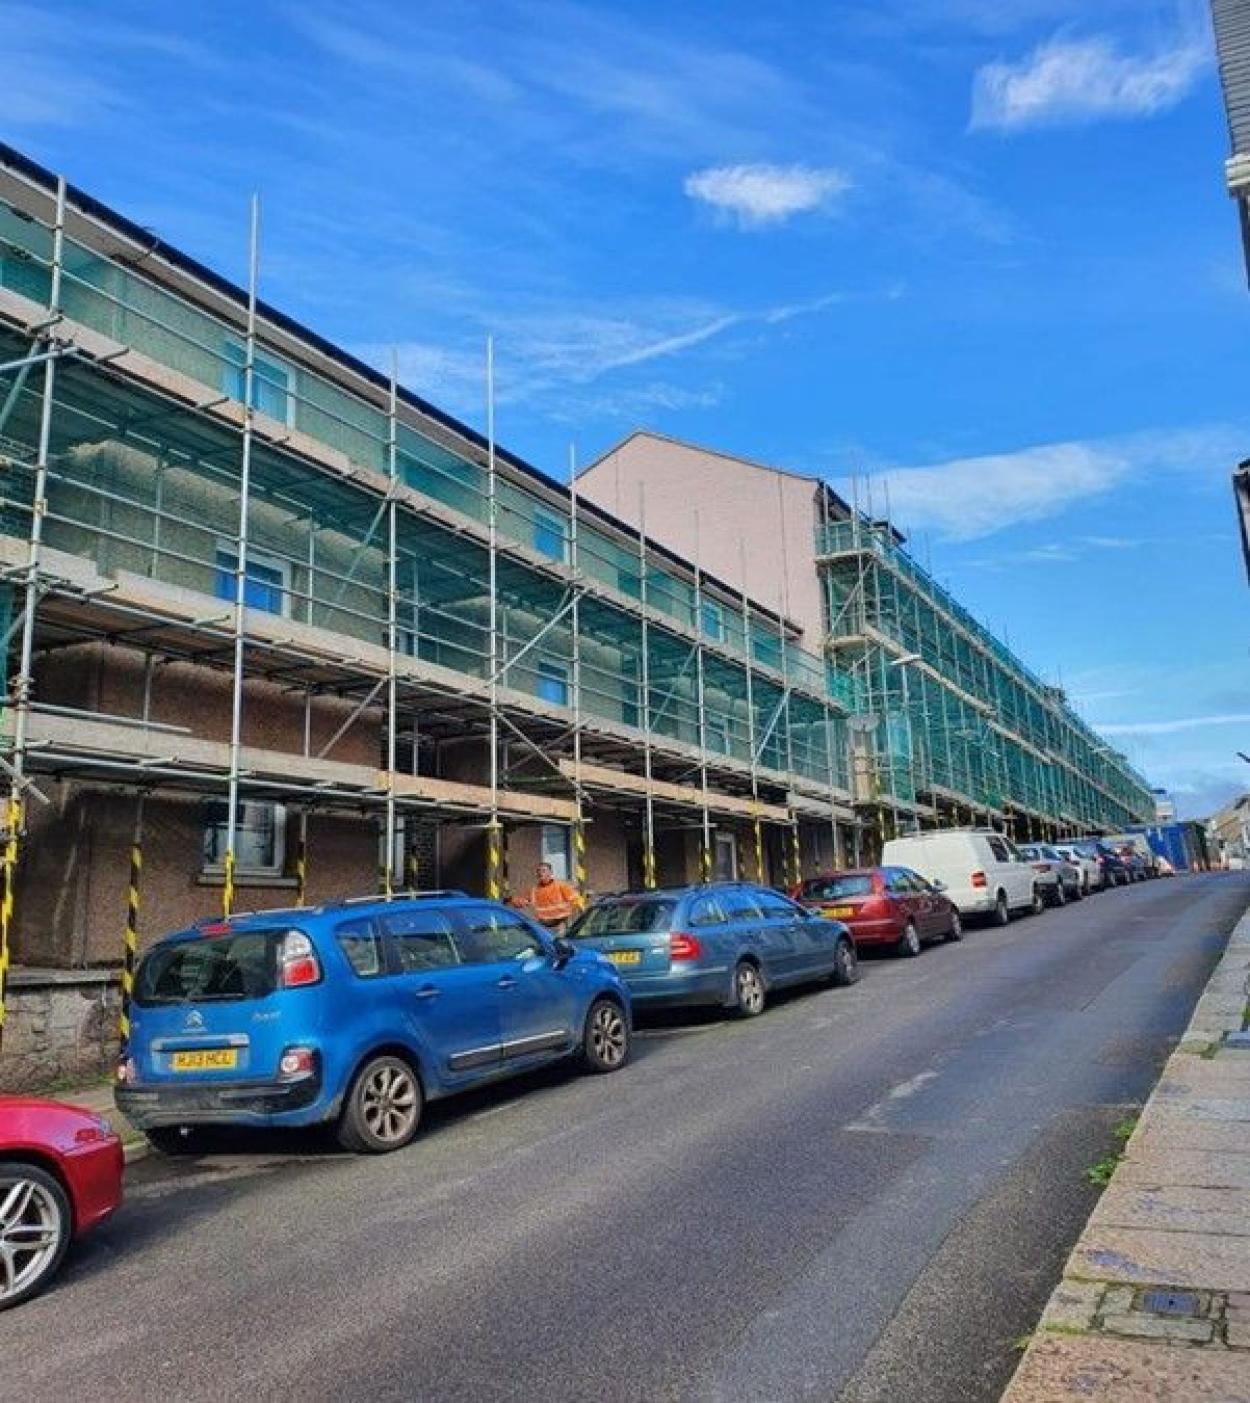 Our Exeter team has recently completed external works on a number of flats in Penzance.